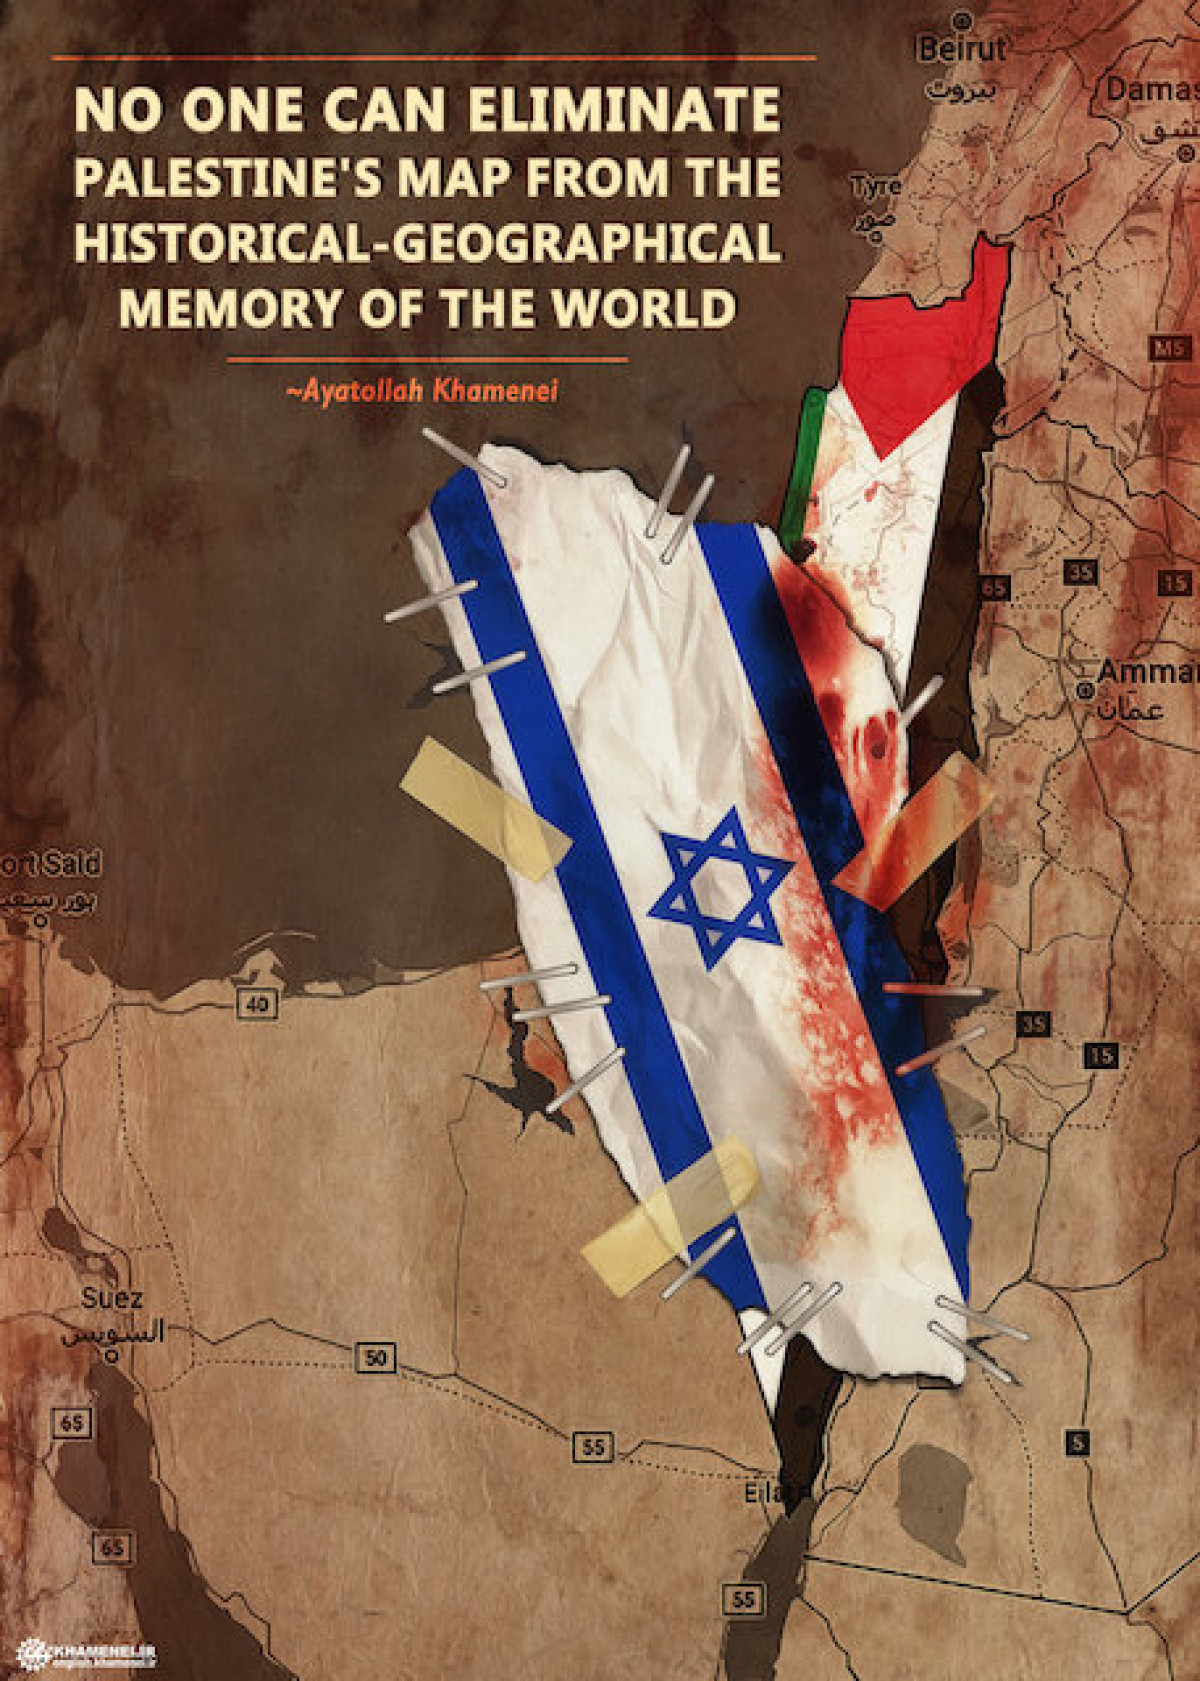 No one can eliminate the map of Palestine from the memory of the world